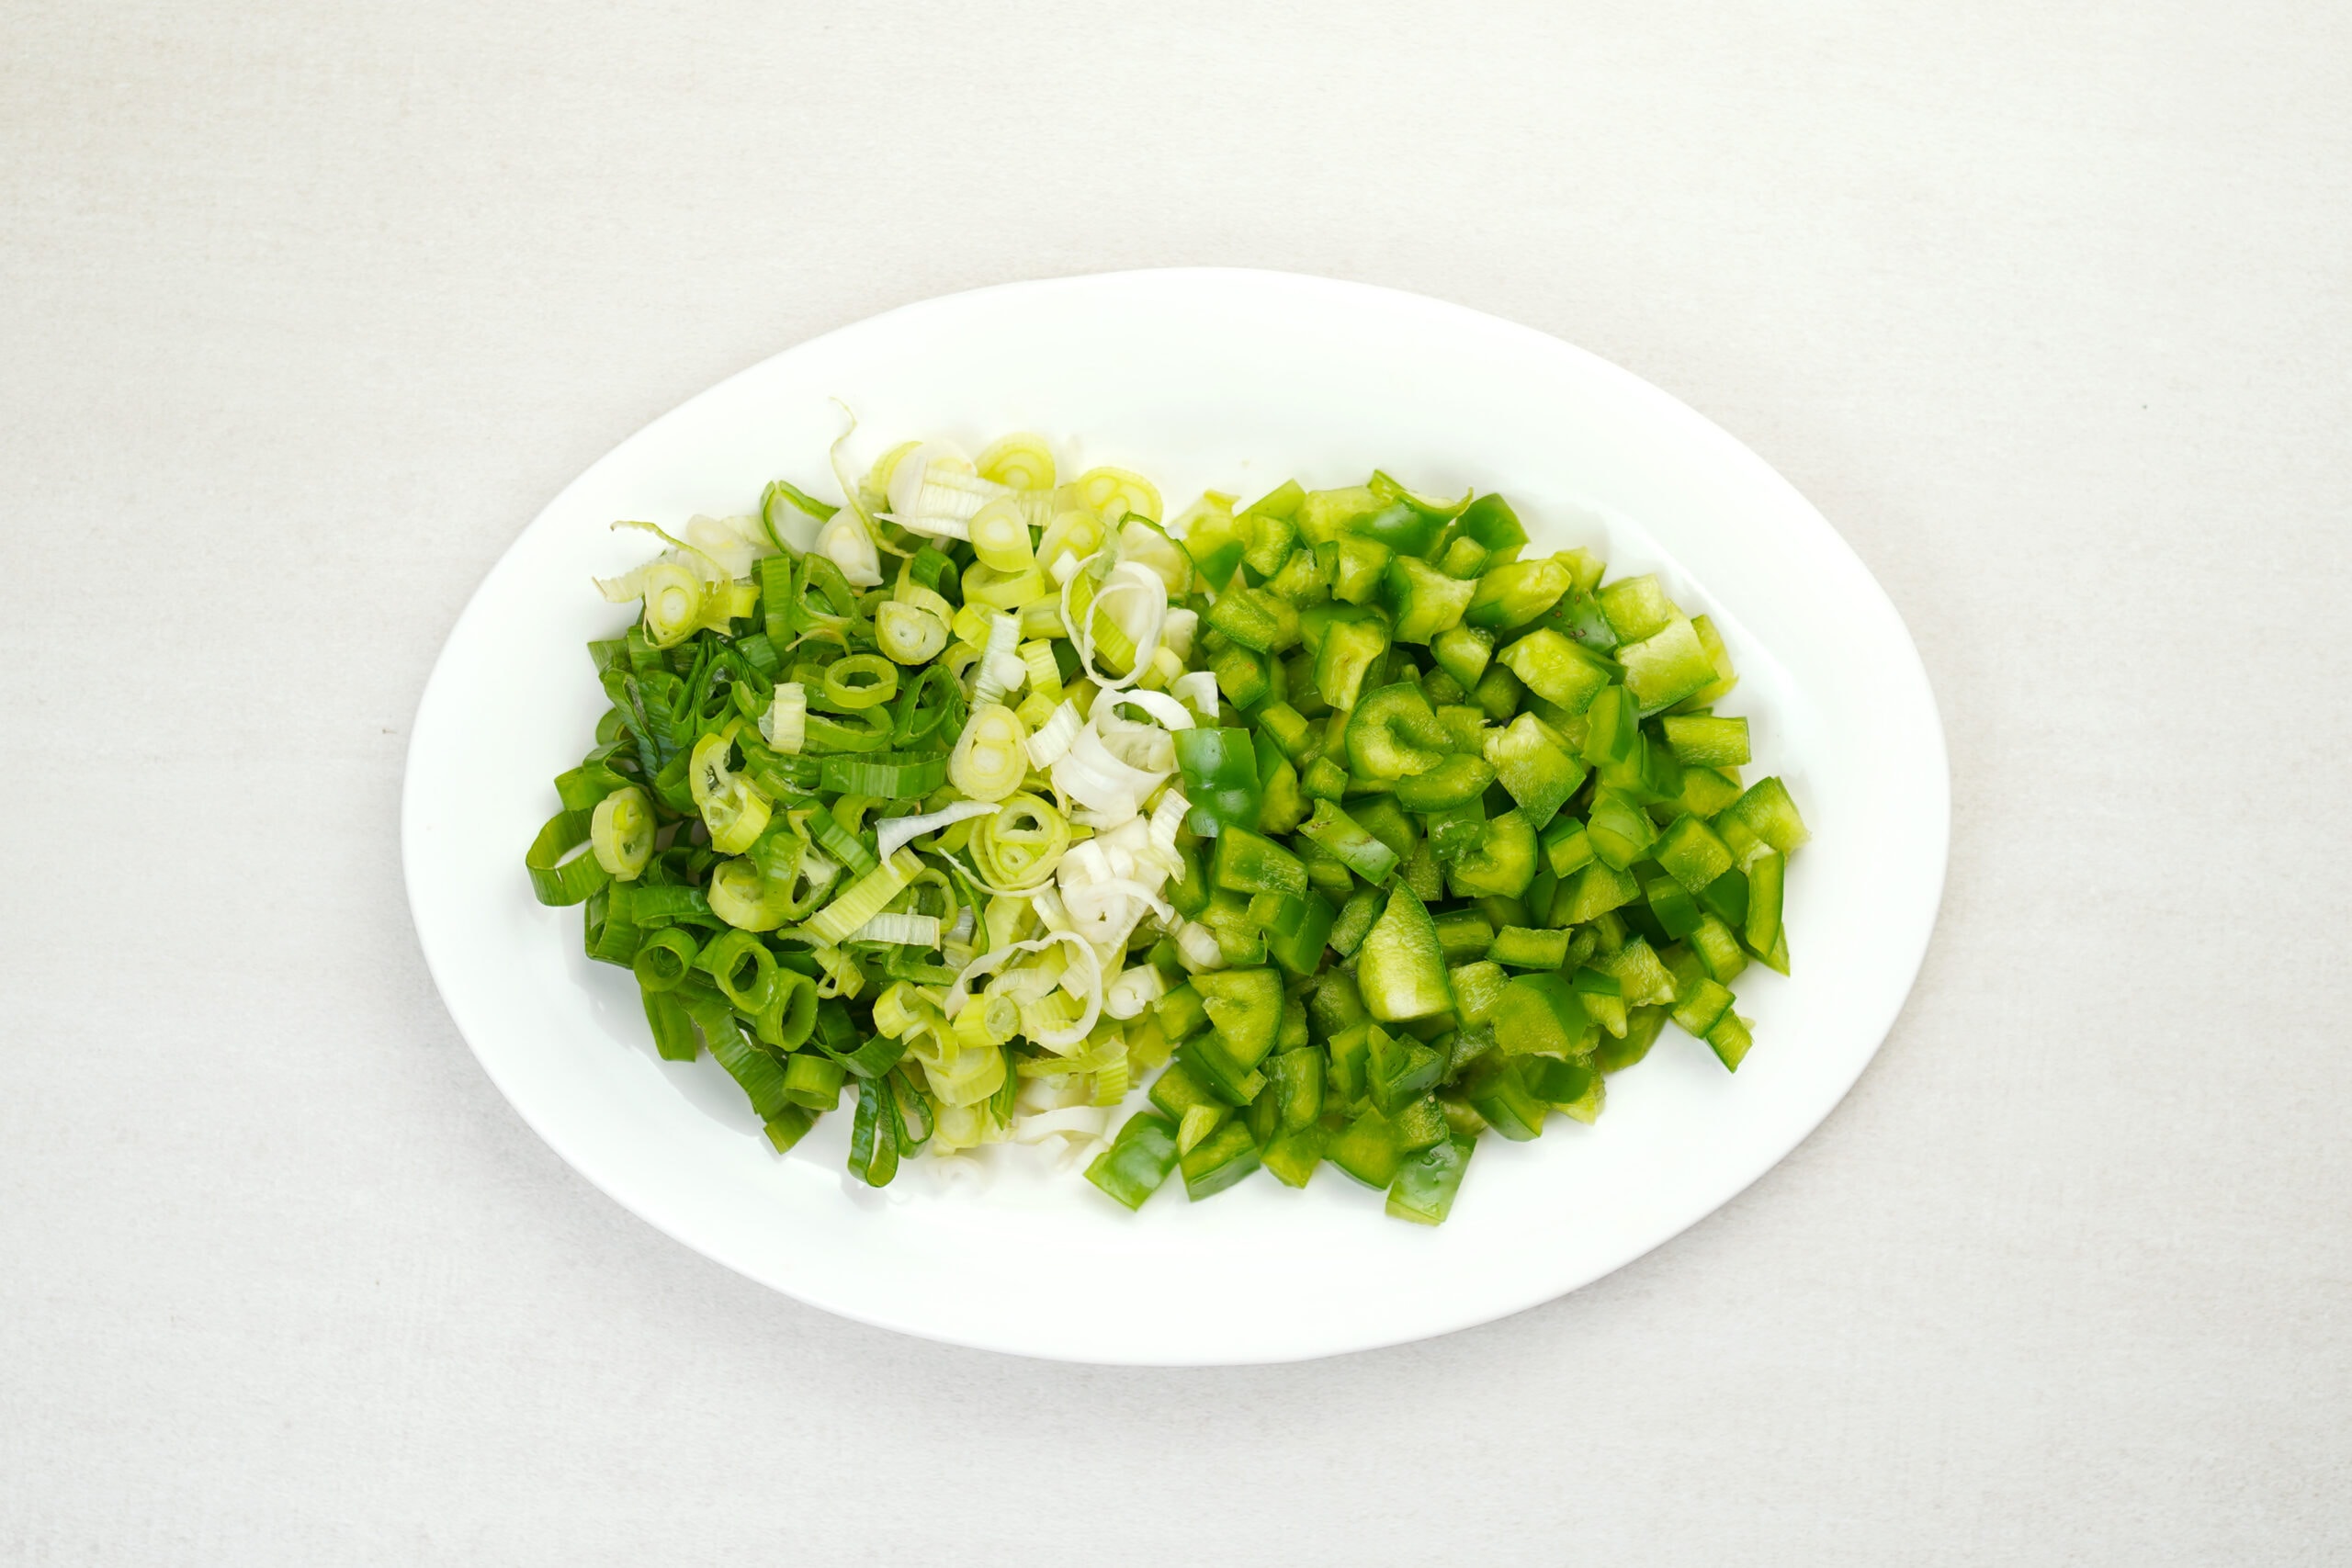 Chopped green onions and bell peppers on white plate